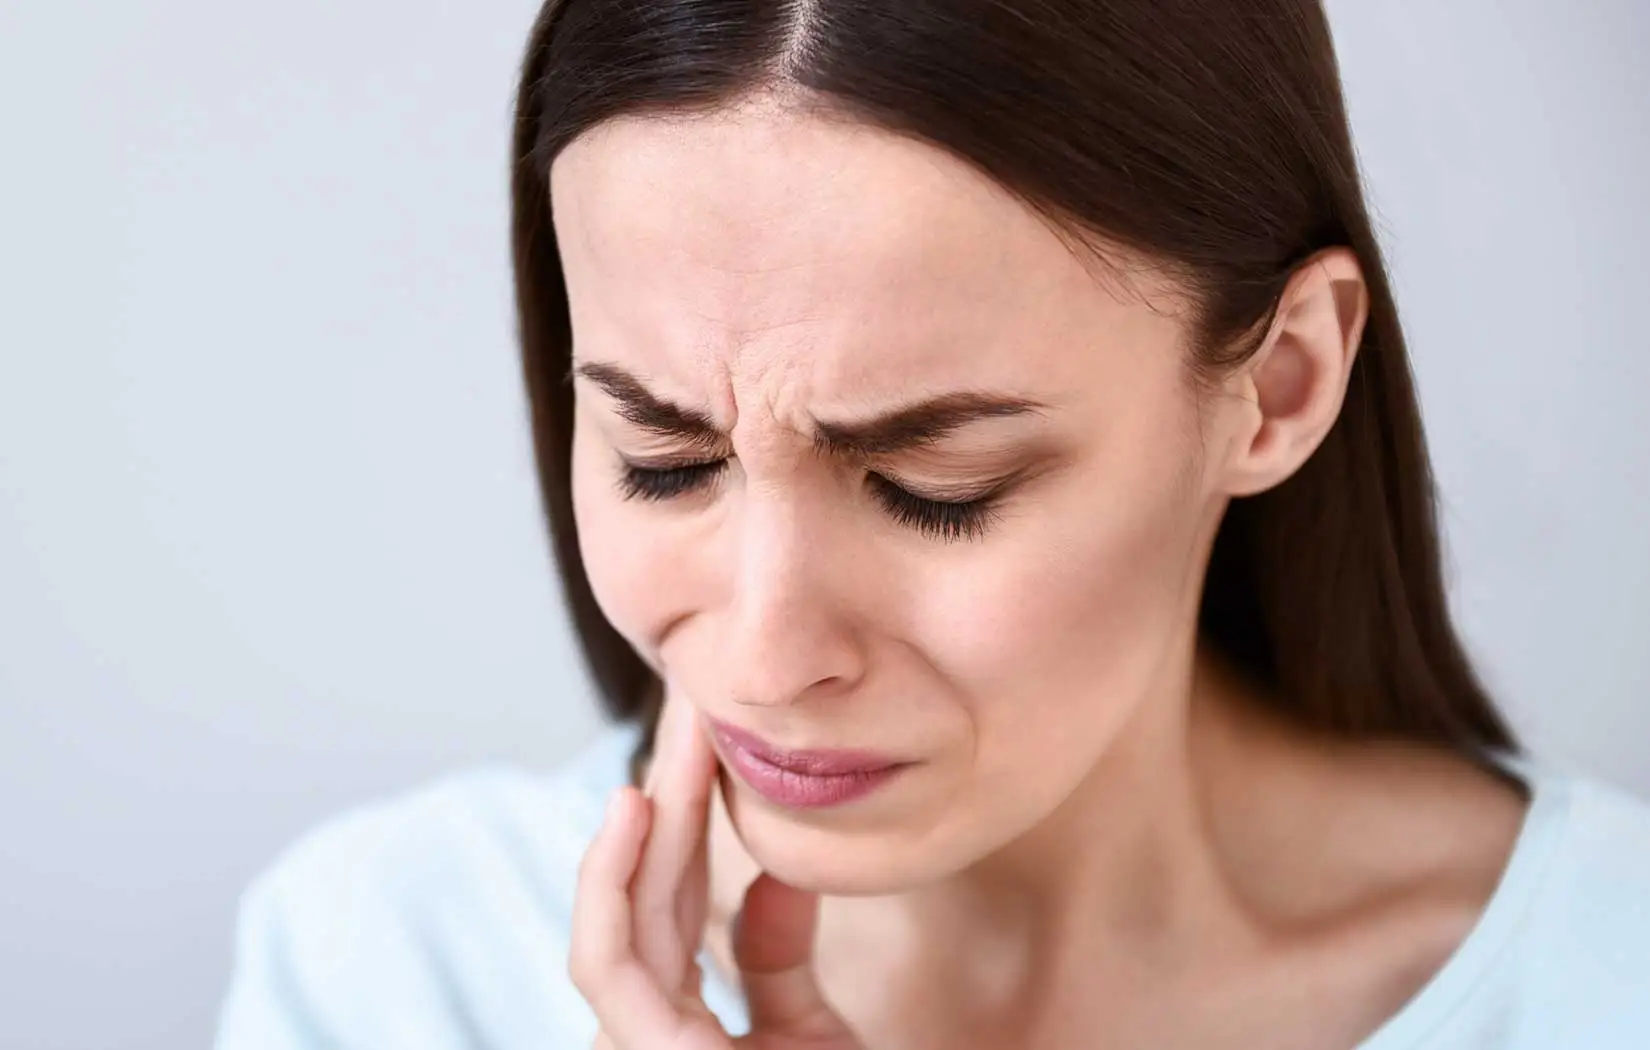 Women with tooth pain needs emergency dentist in San Juan Capistrano, CA